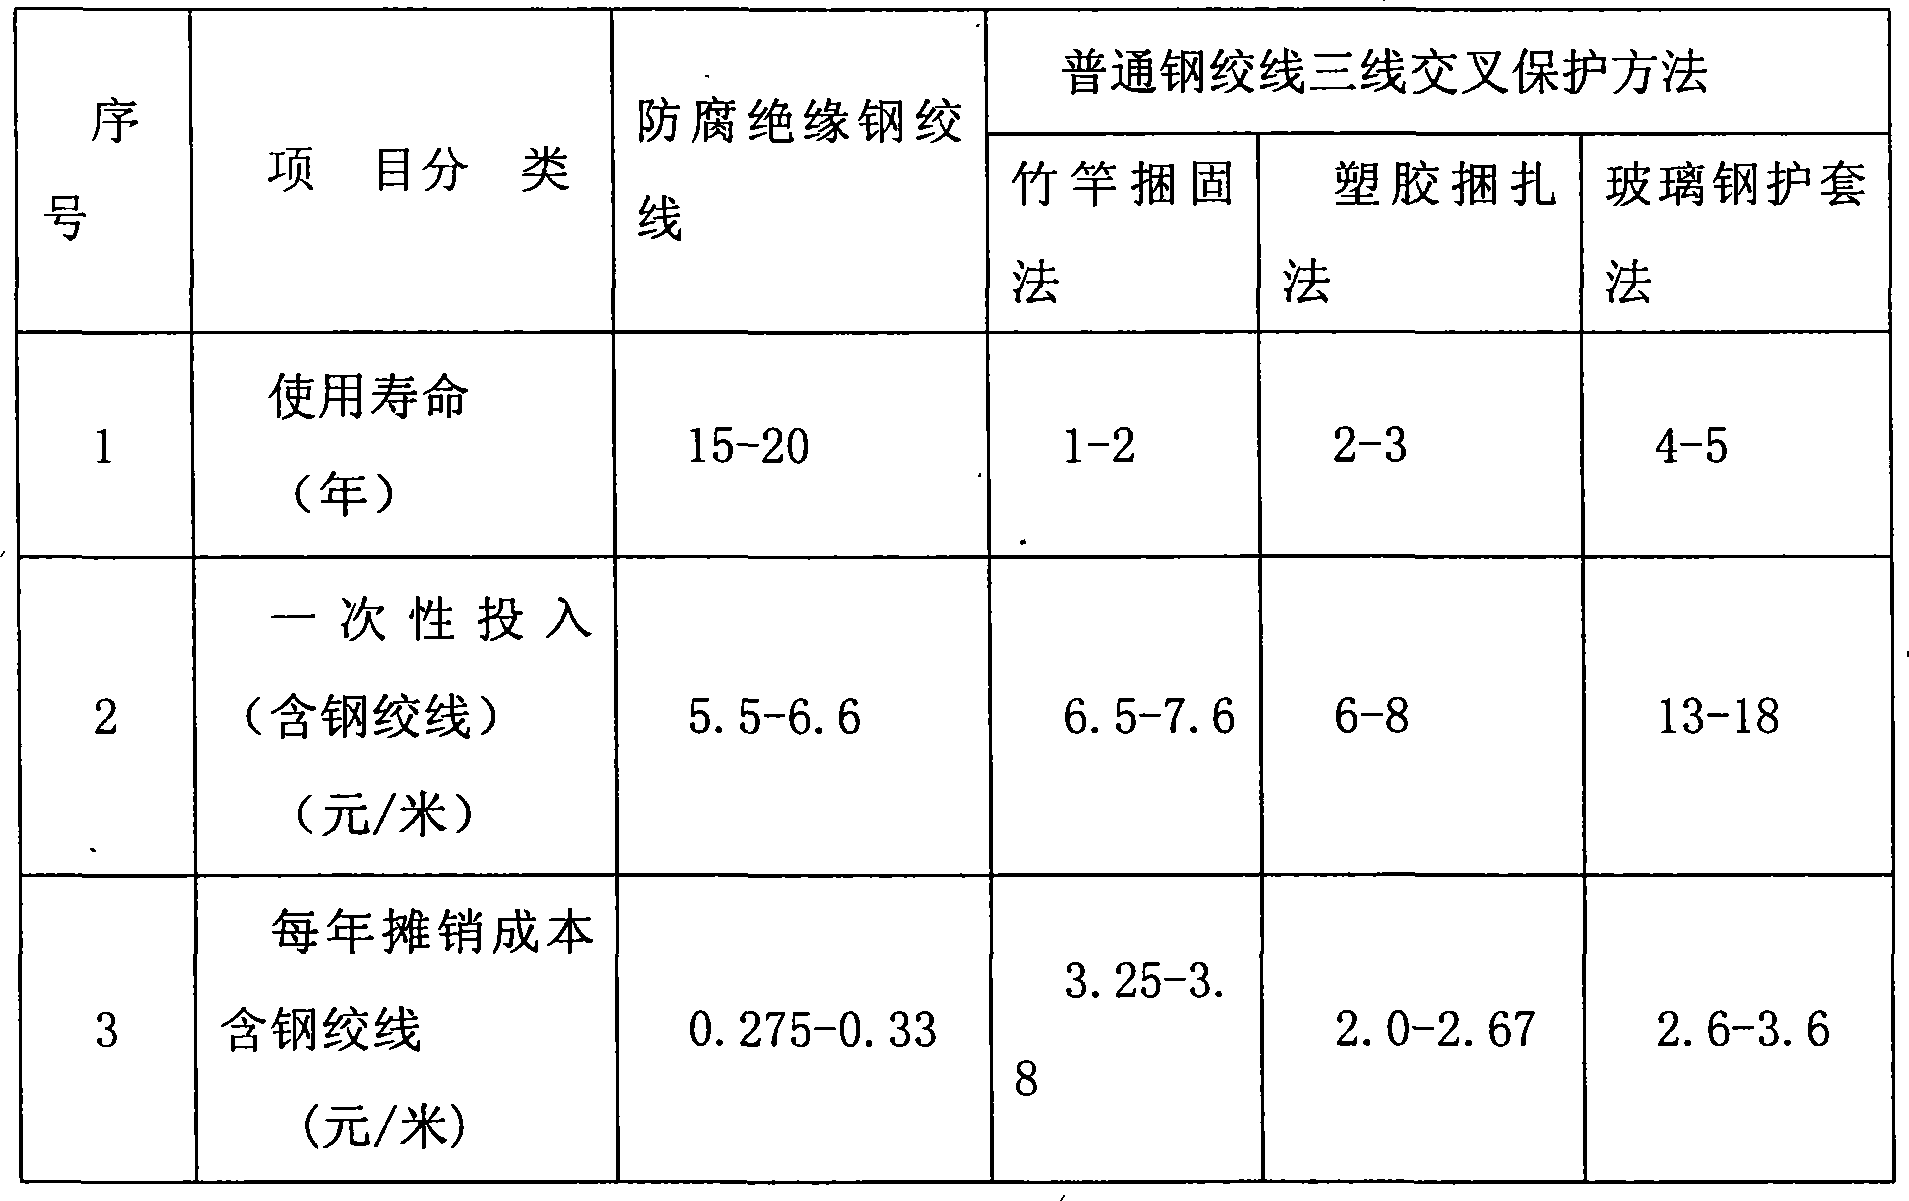 Construction method for adopting anti-corrosion insulation cable in overhead communication line